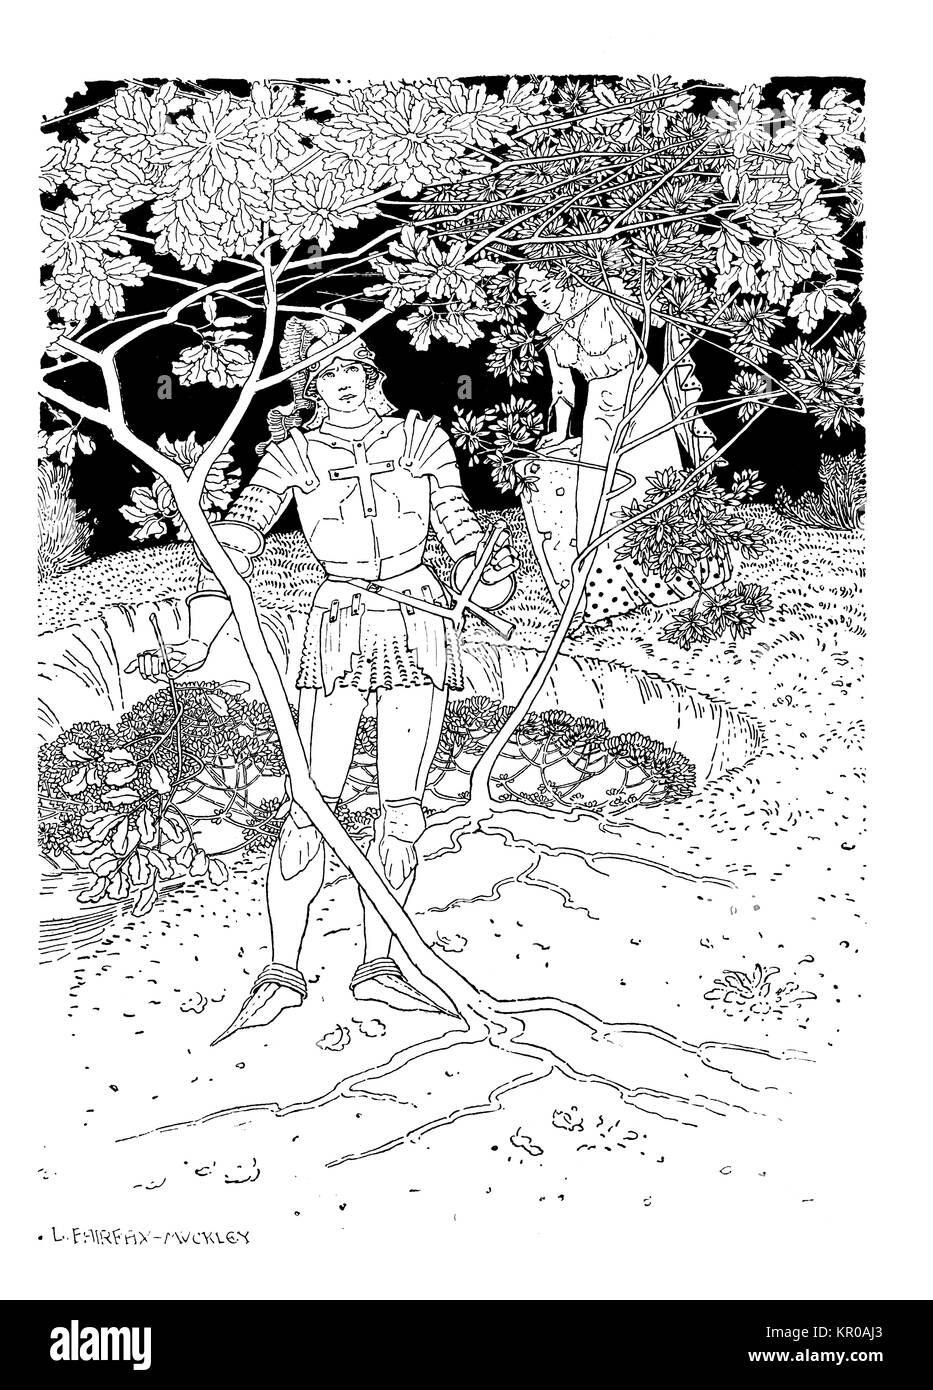 Illustration to Spenser’s Faerie Queen by painter, illustrator and etcher Louis Fairfax Muckley from 1894 Studio Magazine Stock Photo